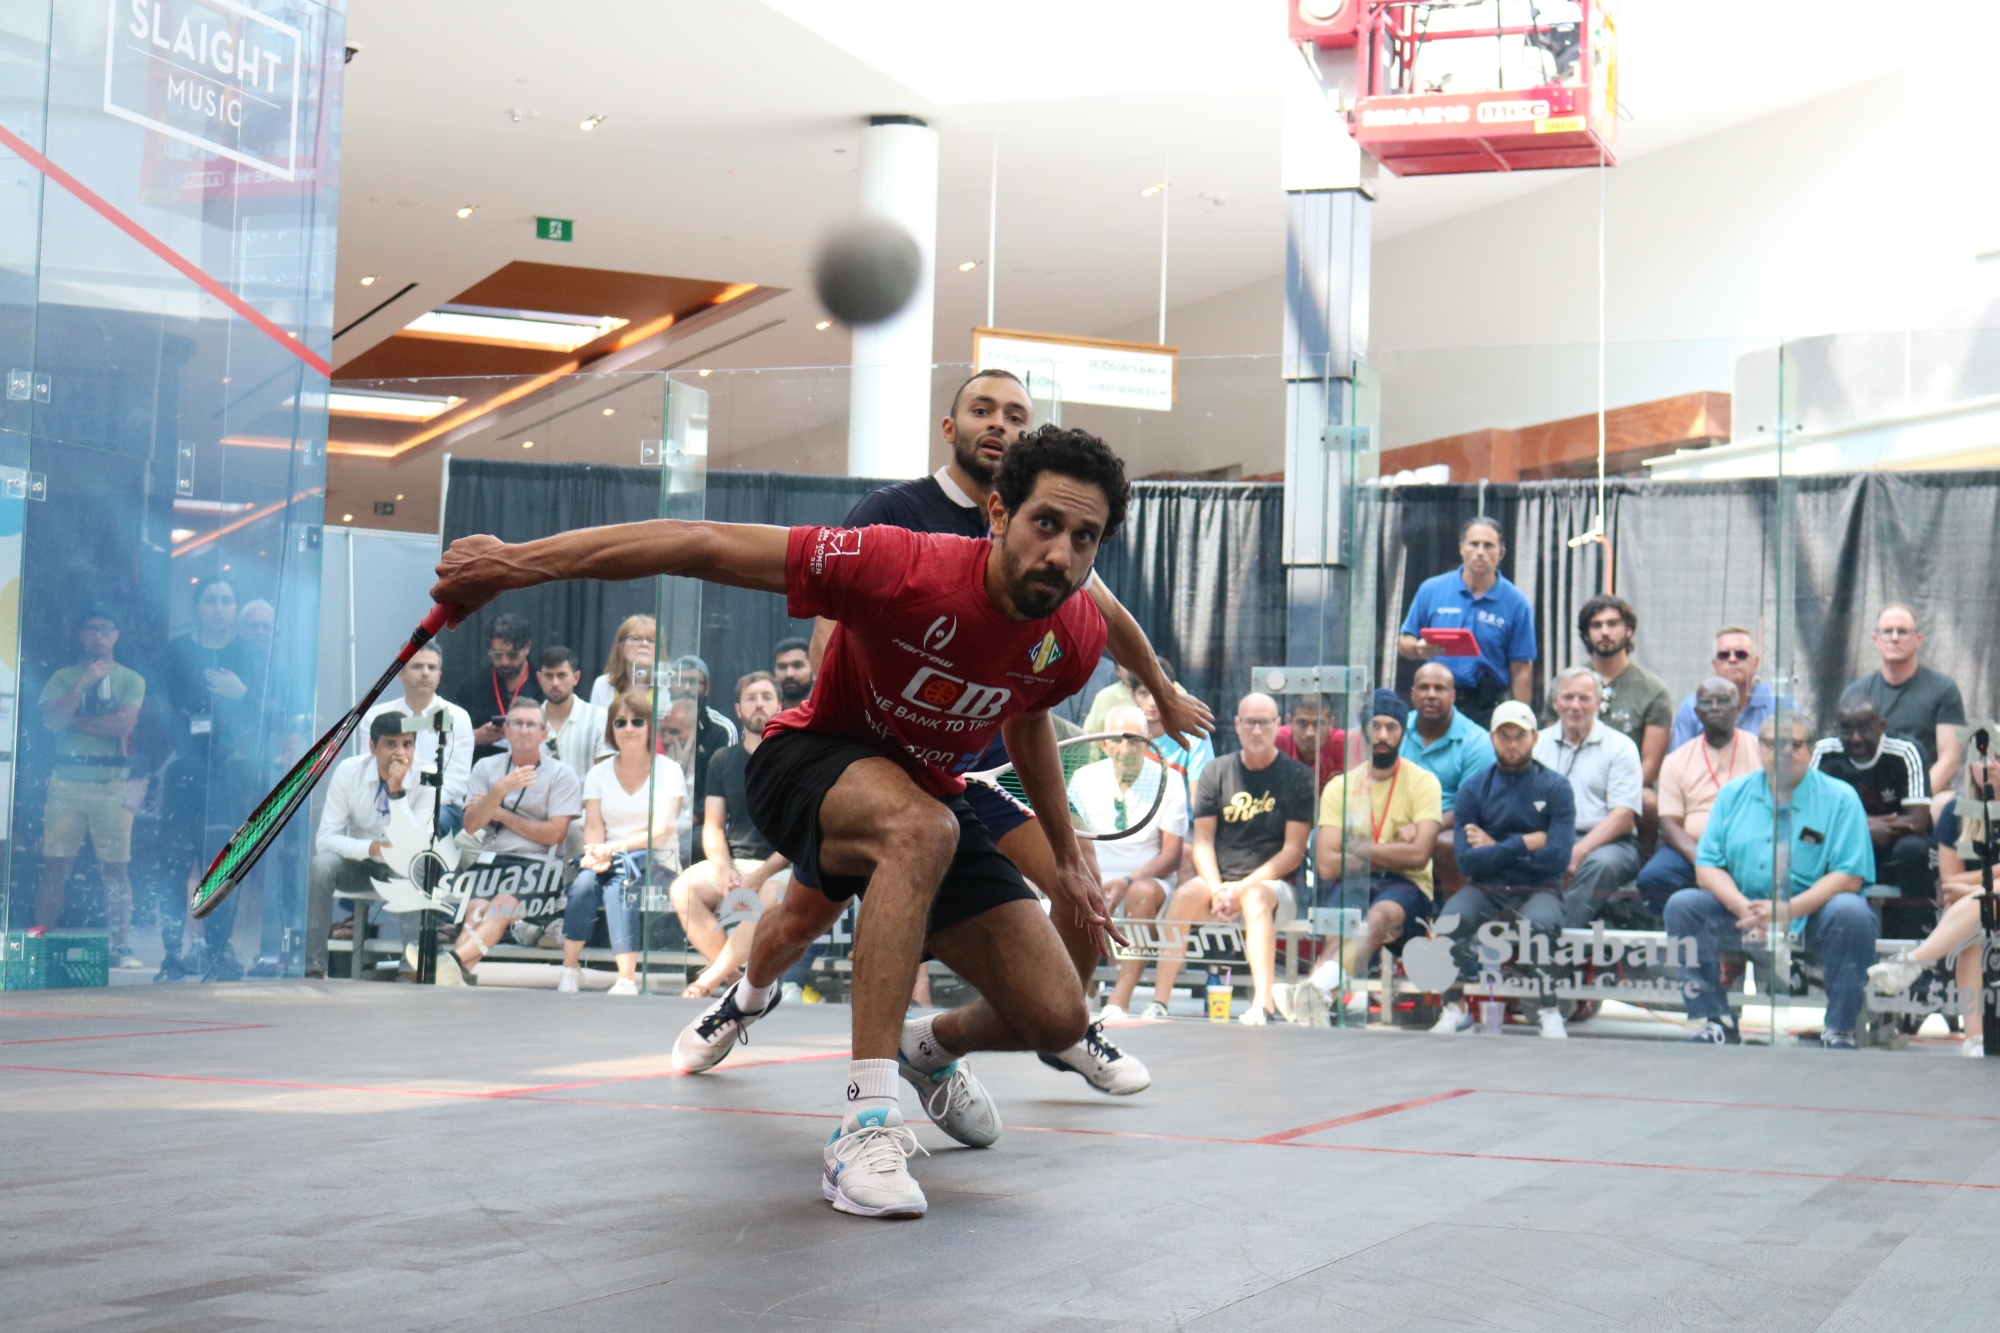 Squash players competing to hit the ball on clear squash court